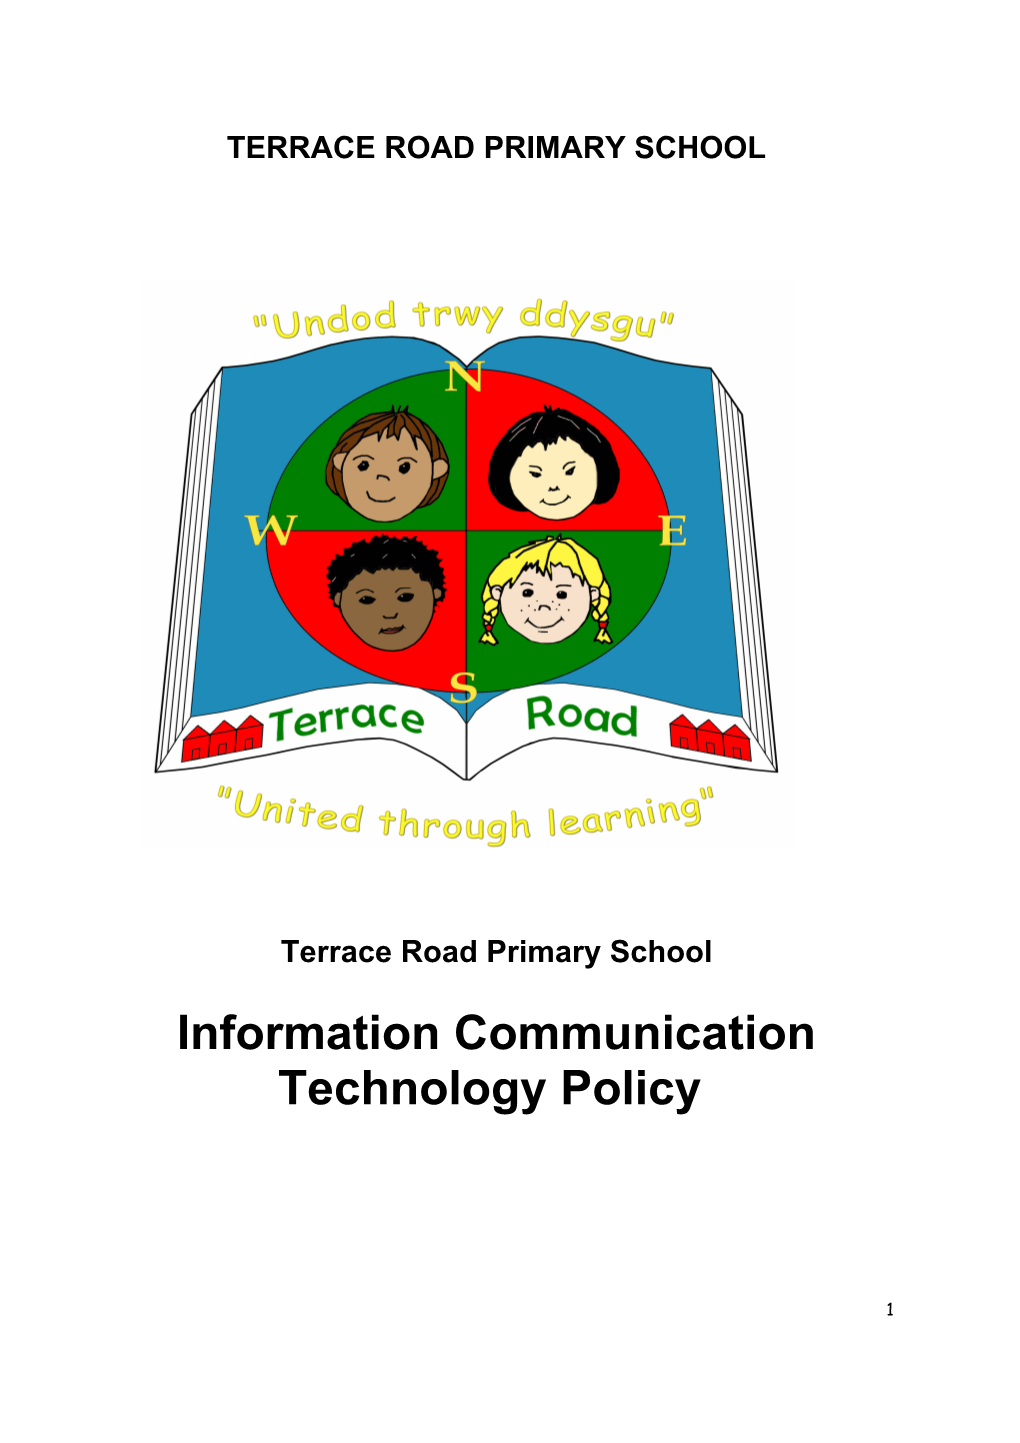 Information Communication Technology Policy